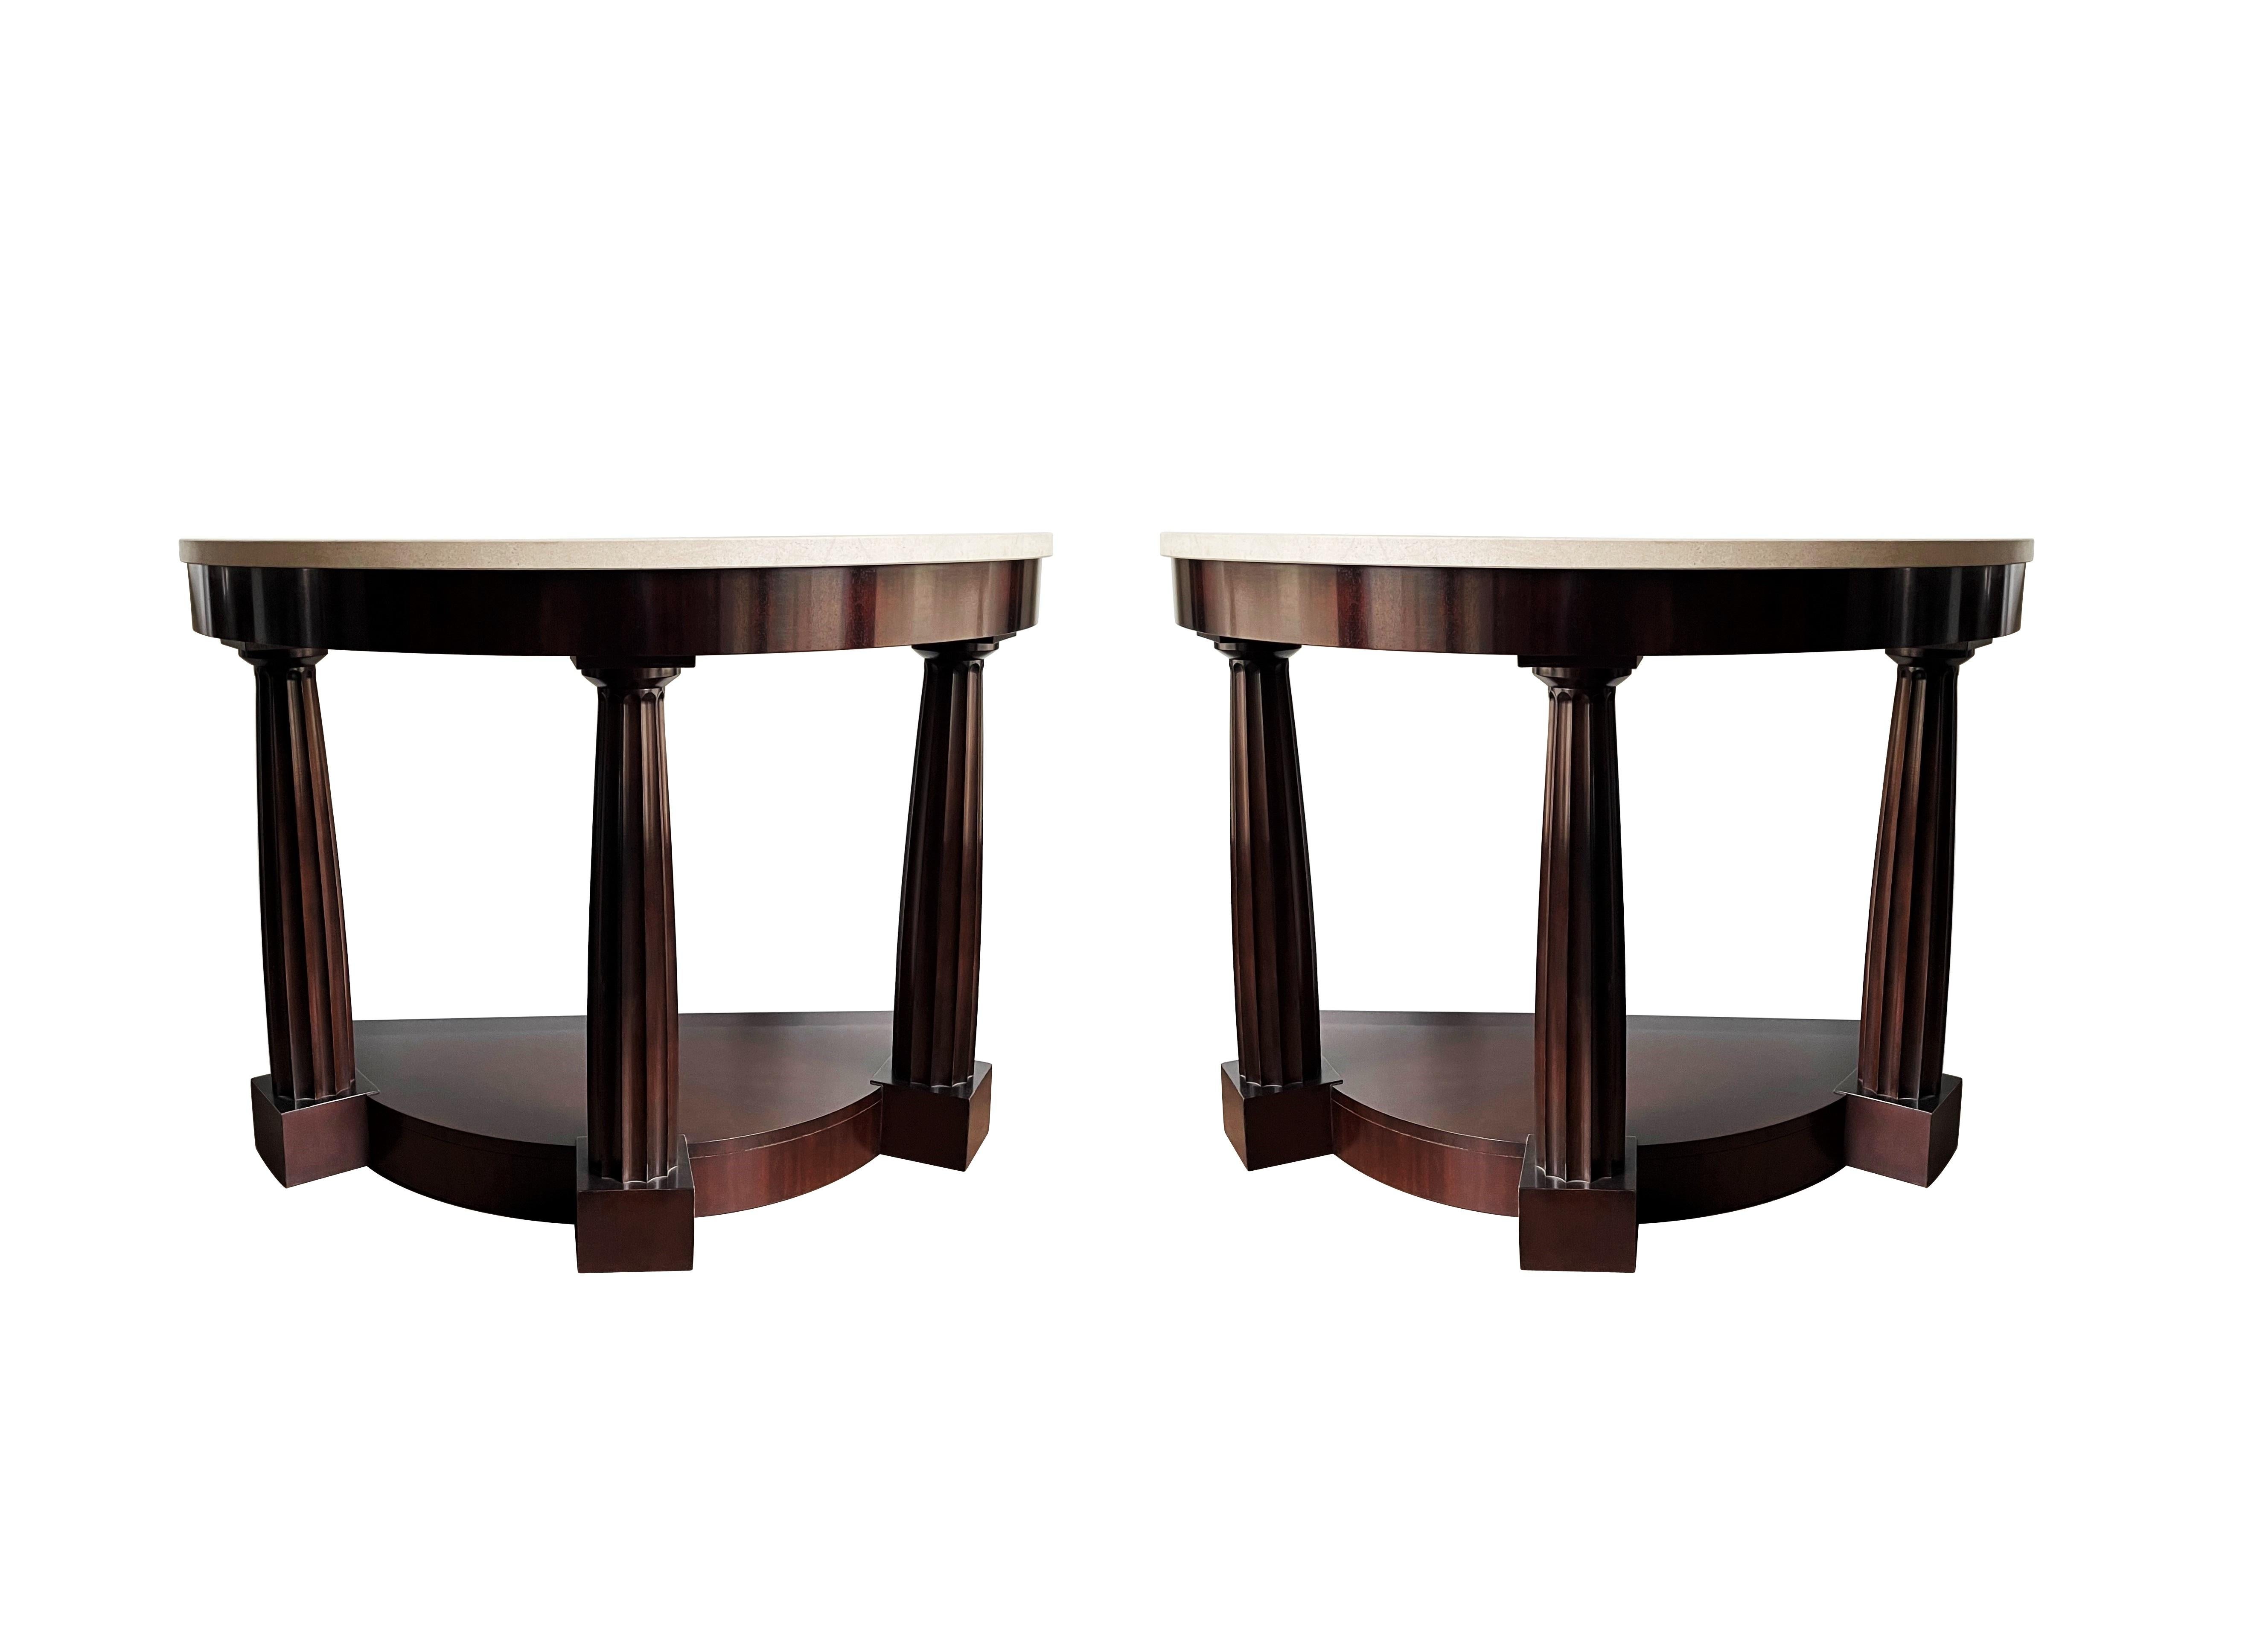 An exceptional set of temple console tables by the distinguished designer Thomas Pheasant for Baker Furniture. No longer in production. Inspired by the ruins of ancient Rome, each piece exhibits strong architectural neo-classic influences combined